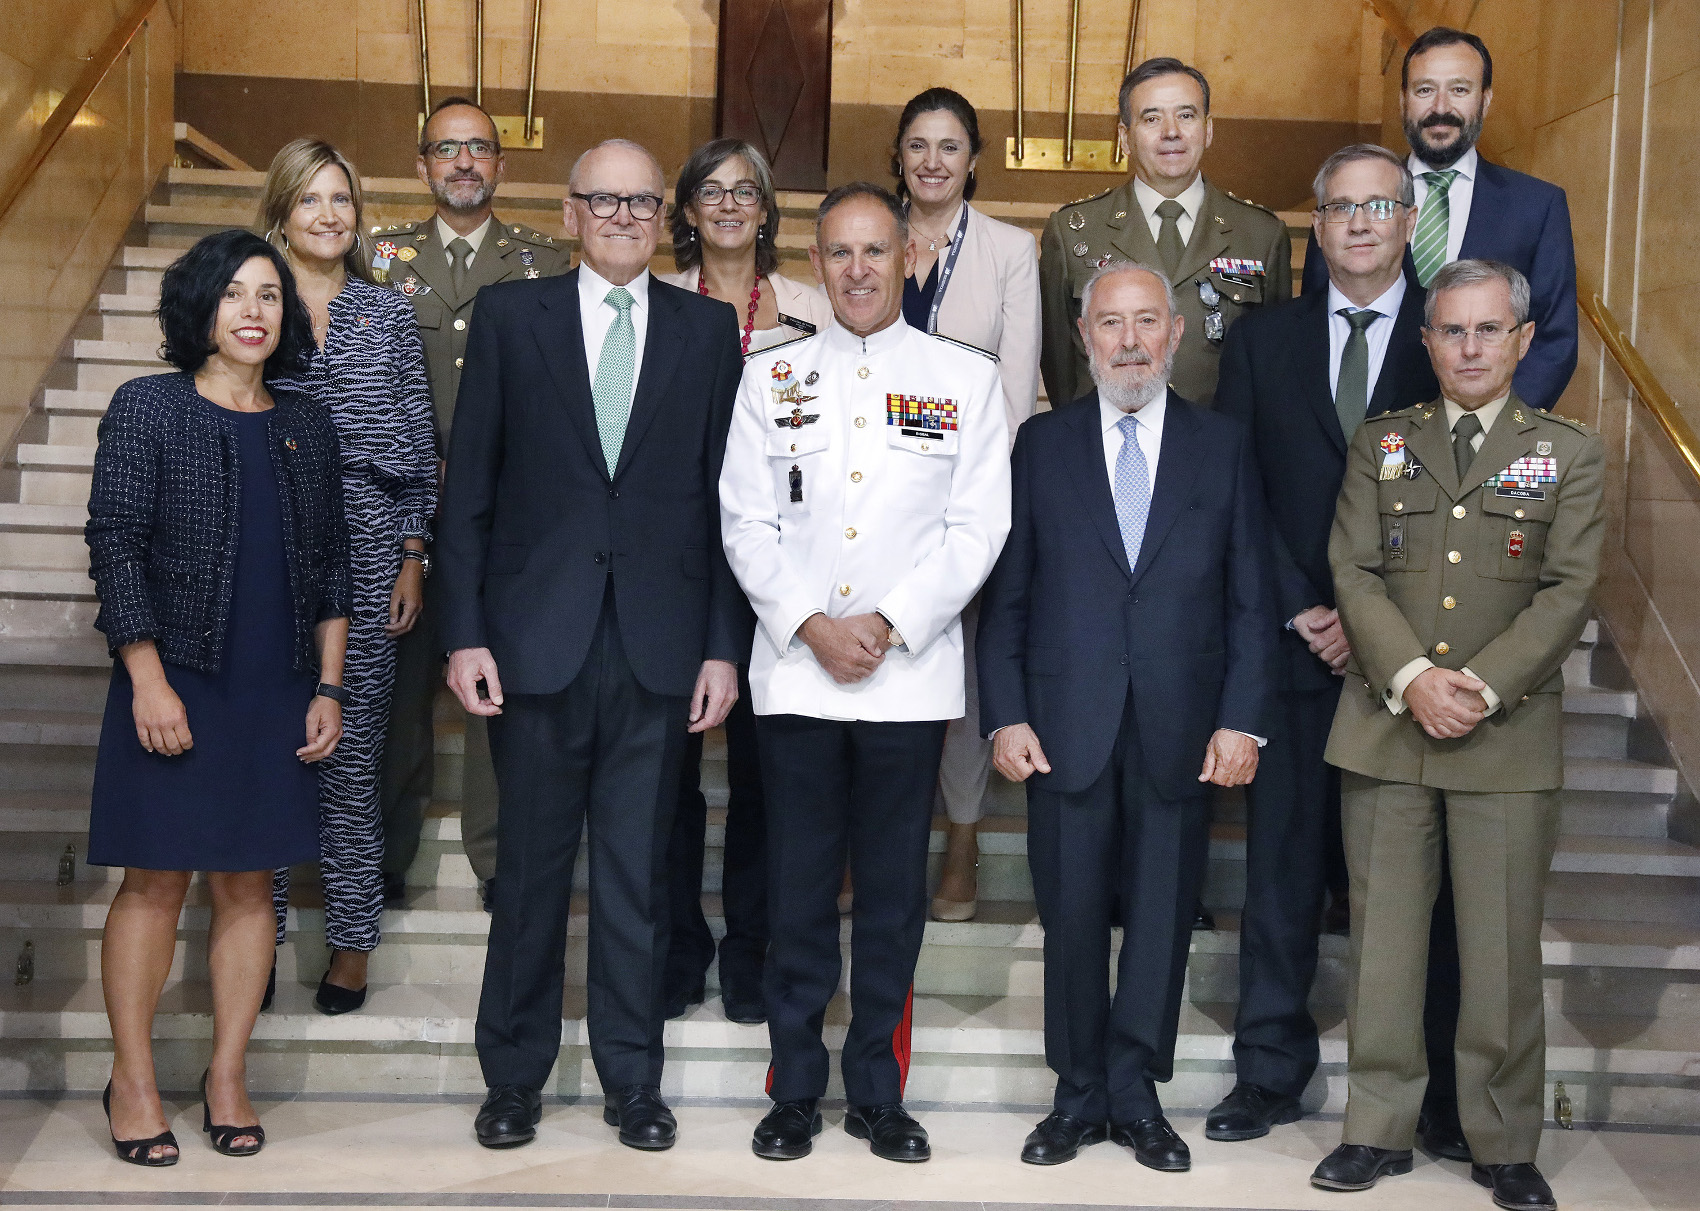 CESEDEN and Iberdrola analyse the role of the Armed Forces and companies in the Sustainable Development Goals